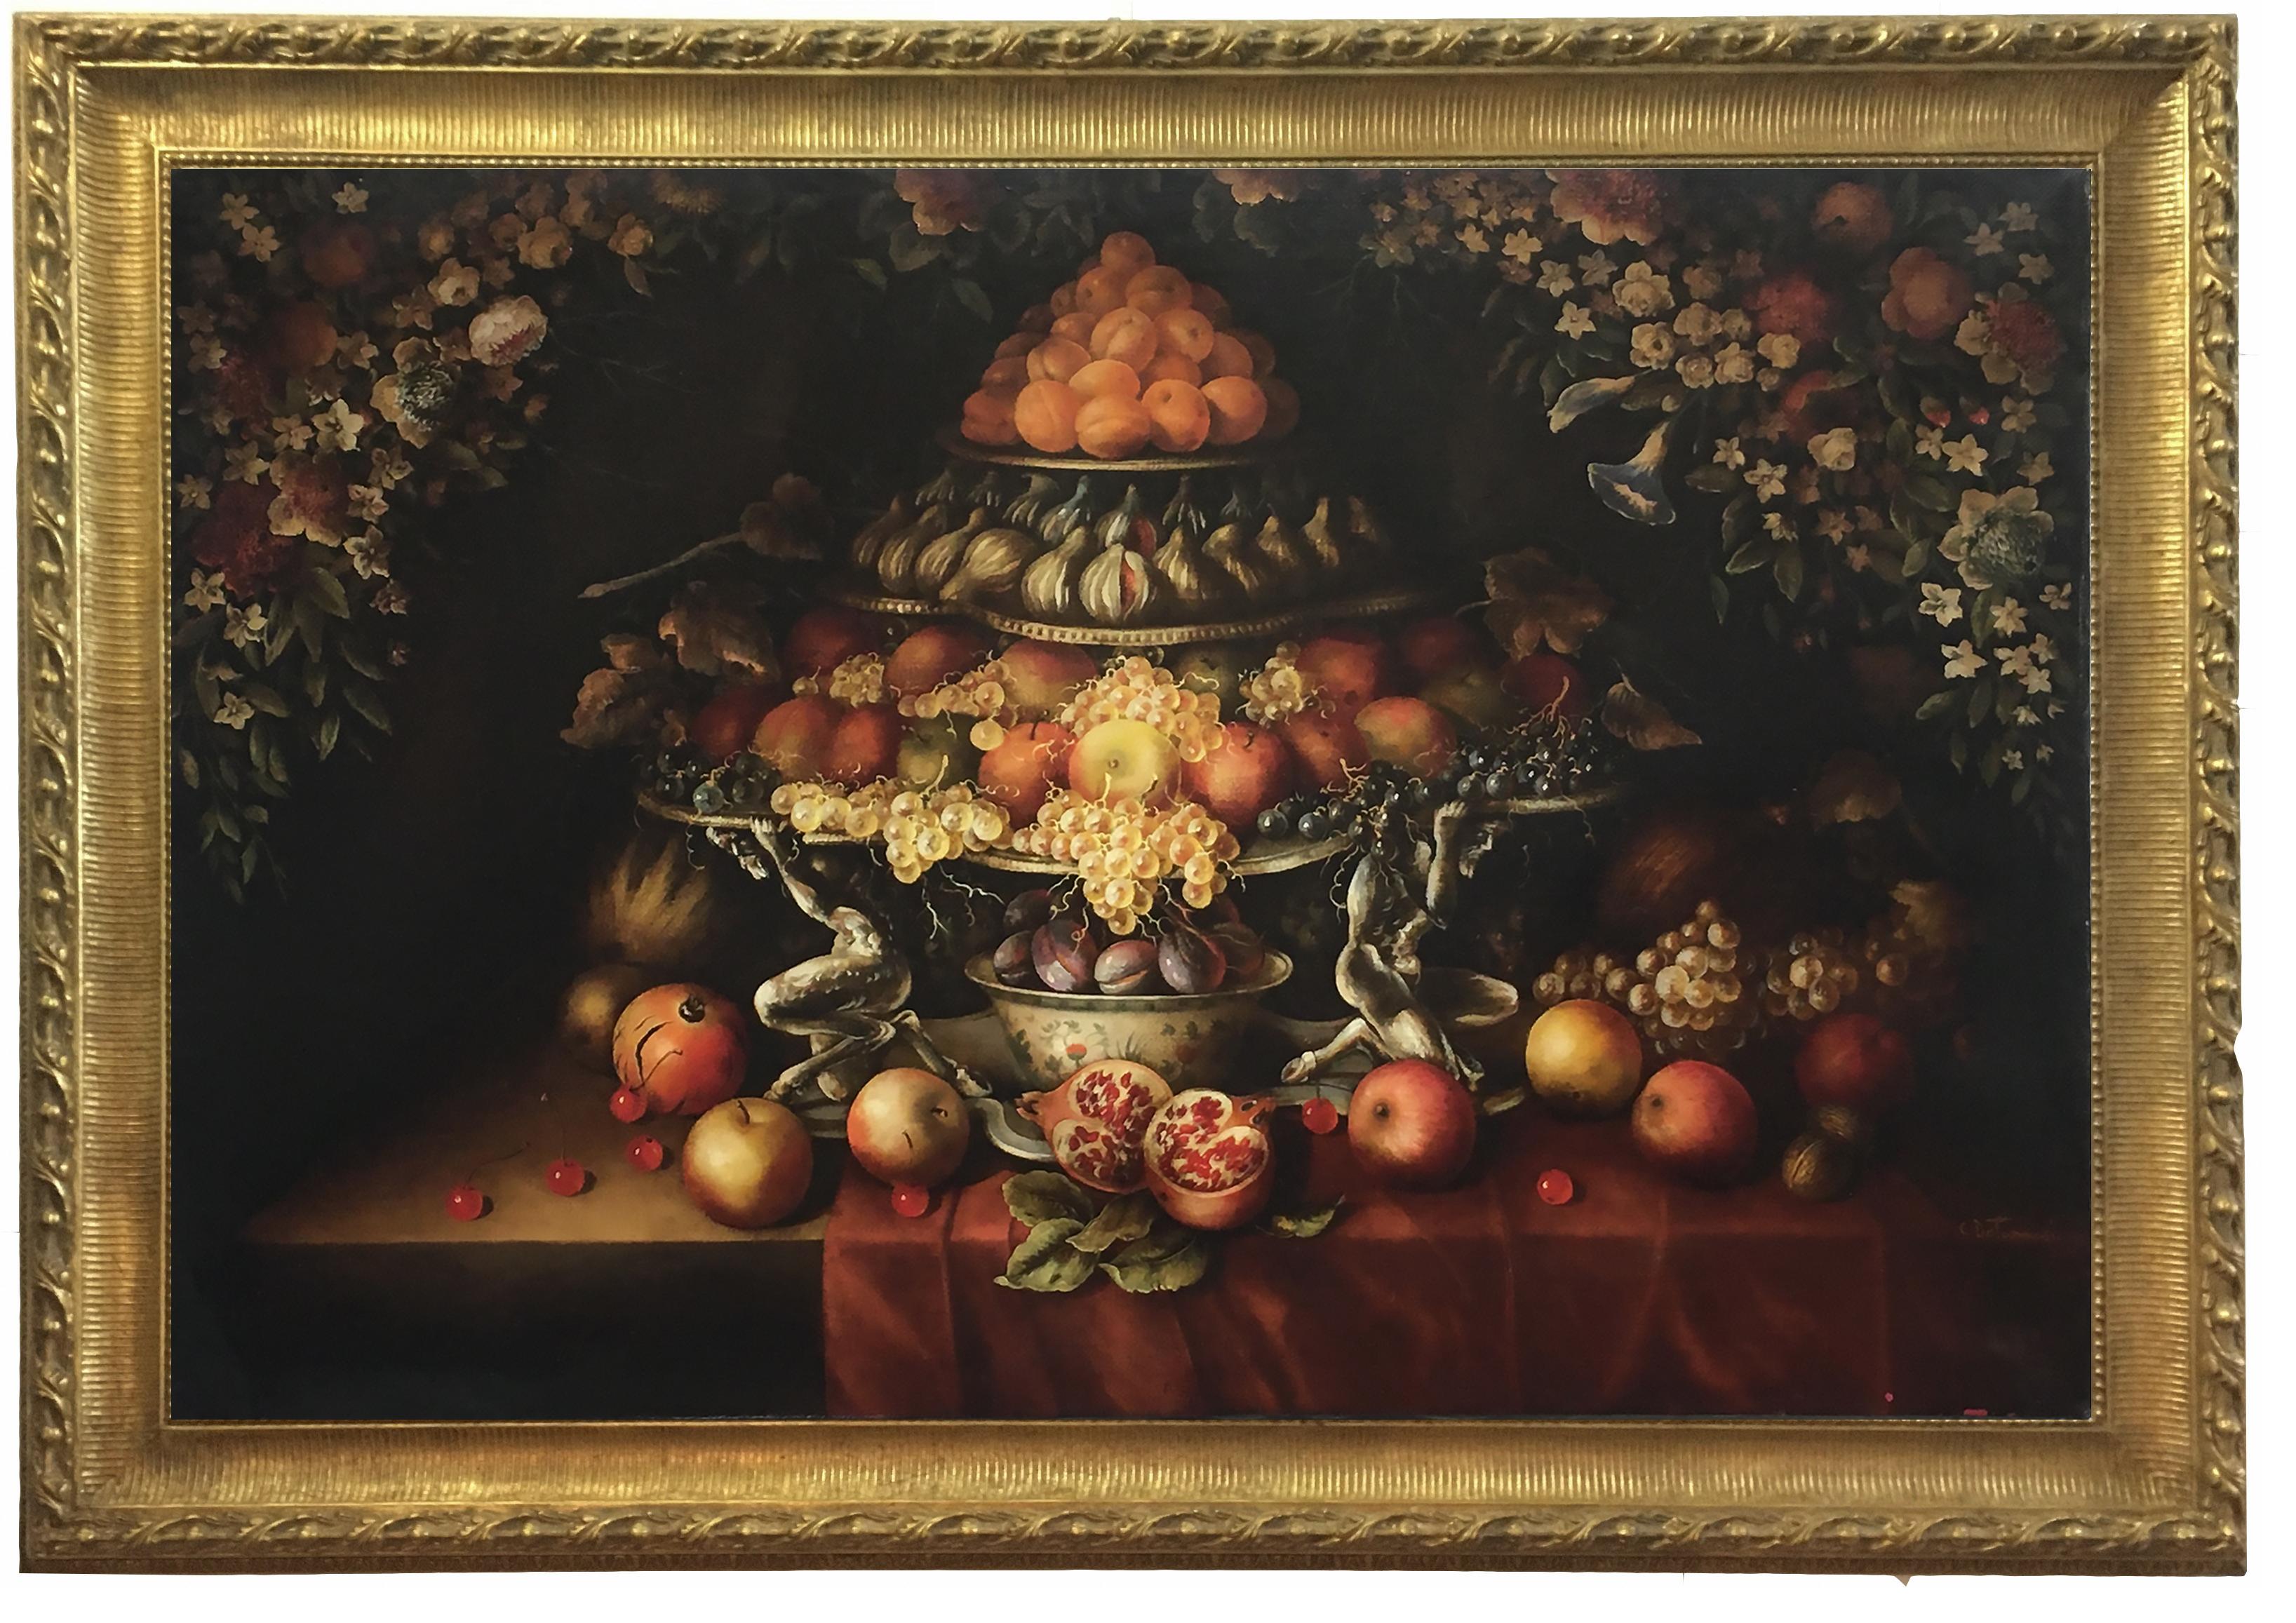 Triumph of fruit and flowers - Carlo De Tommasi Italia 2008 - Oil on canvas mis. cm. 80x120. 
The beautiful painting is inspired by the work of the brilliant French-Flemish painter Jean-Baptiste Monnoyer specialized in flower pieces. His sumptuous,